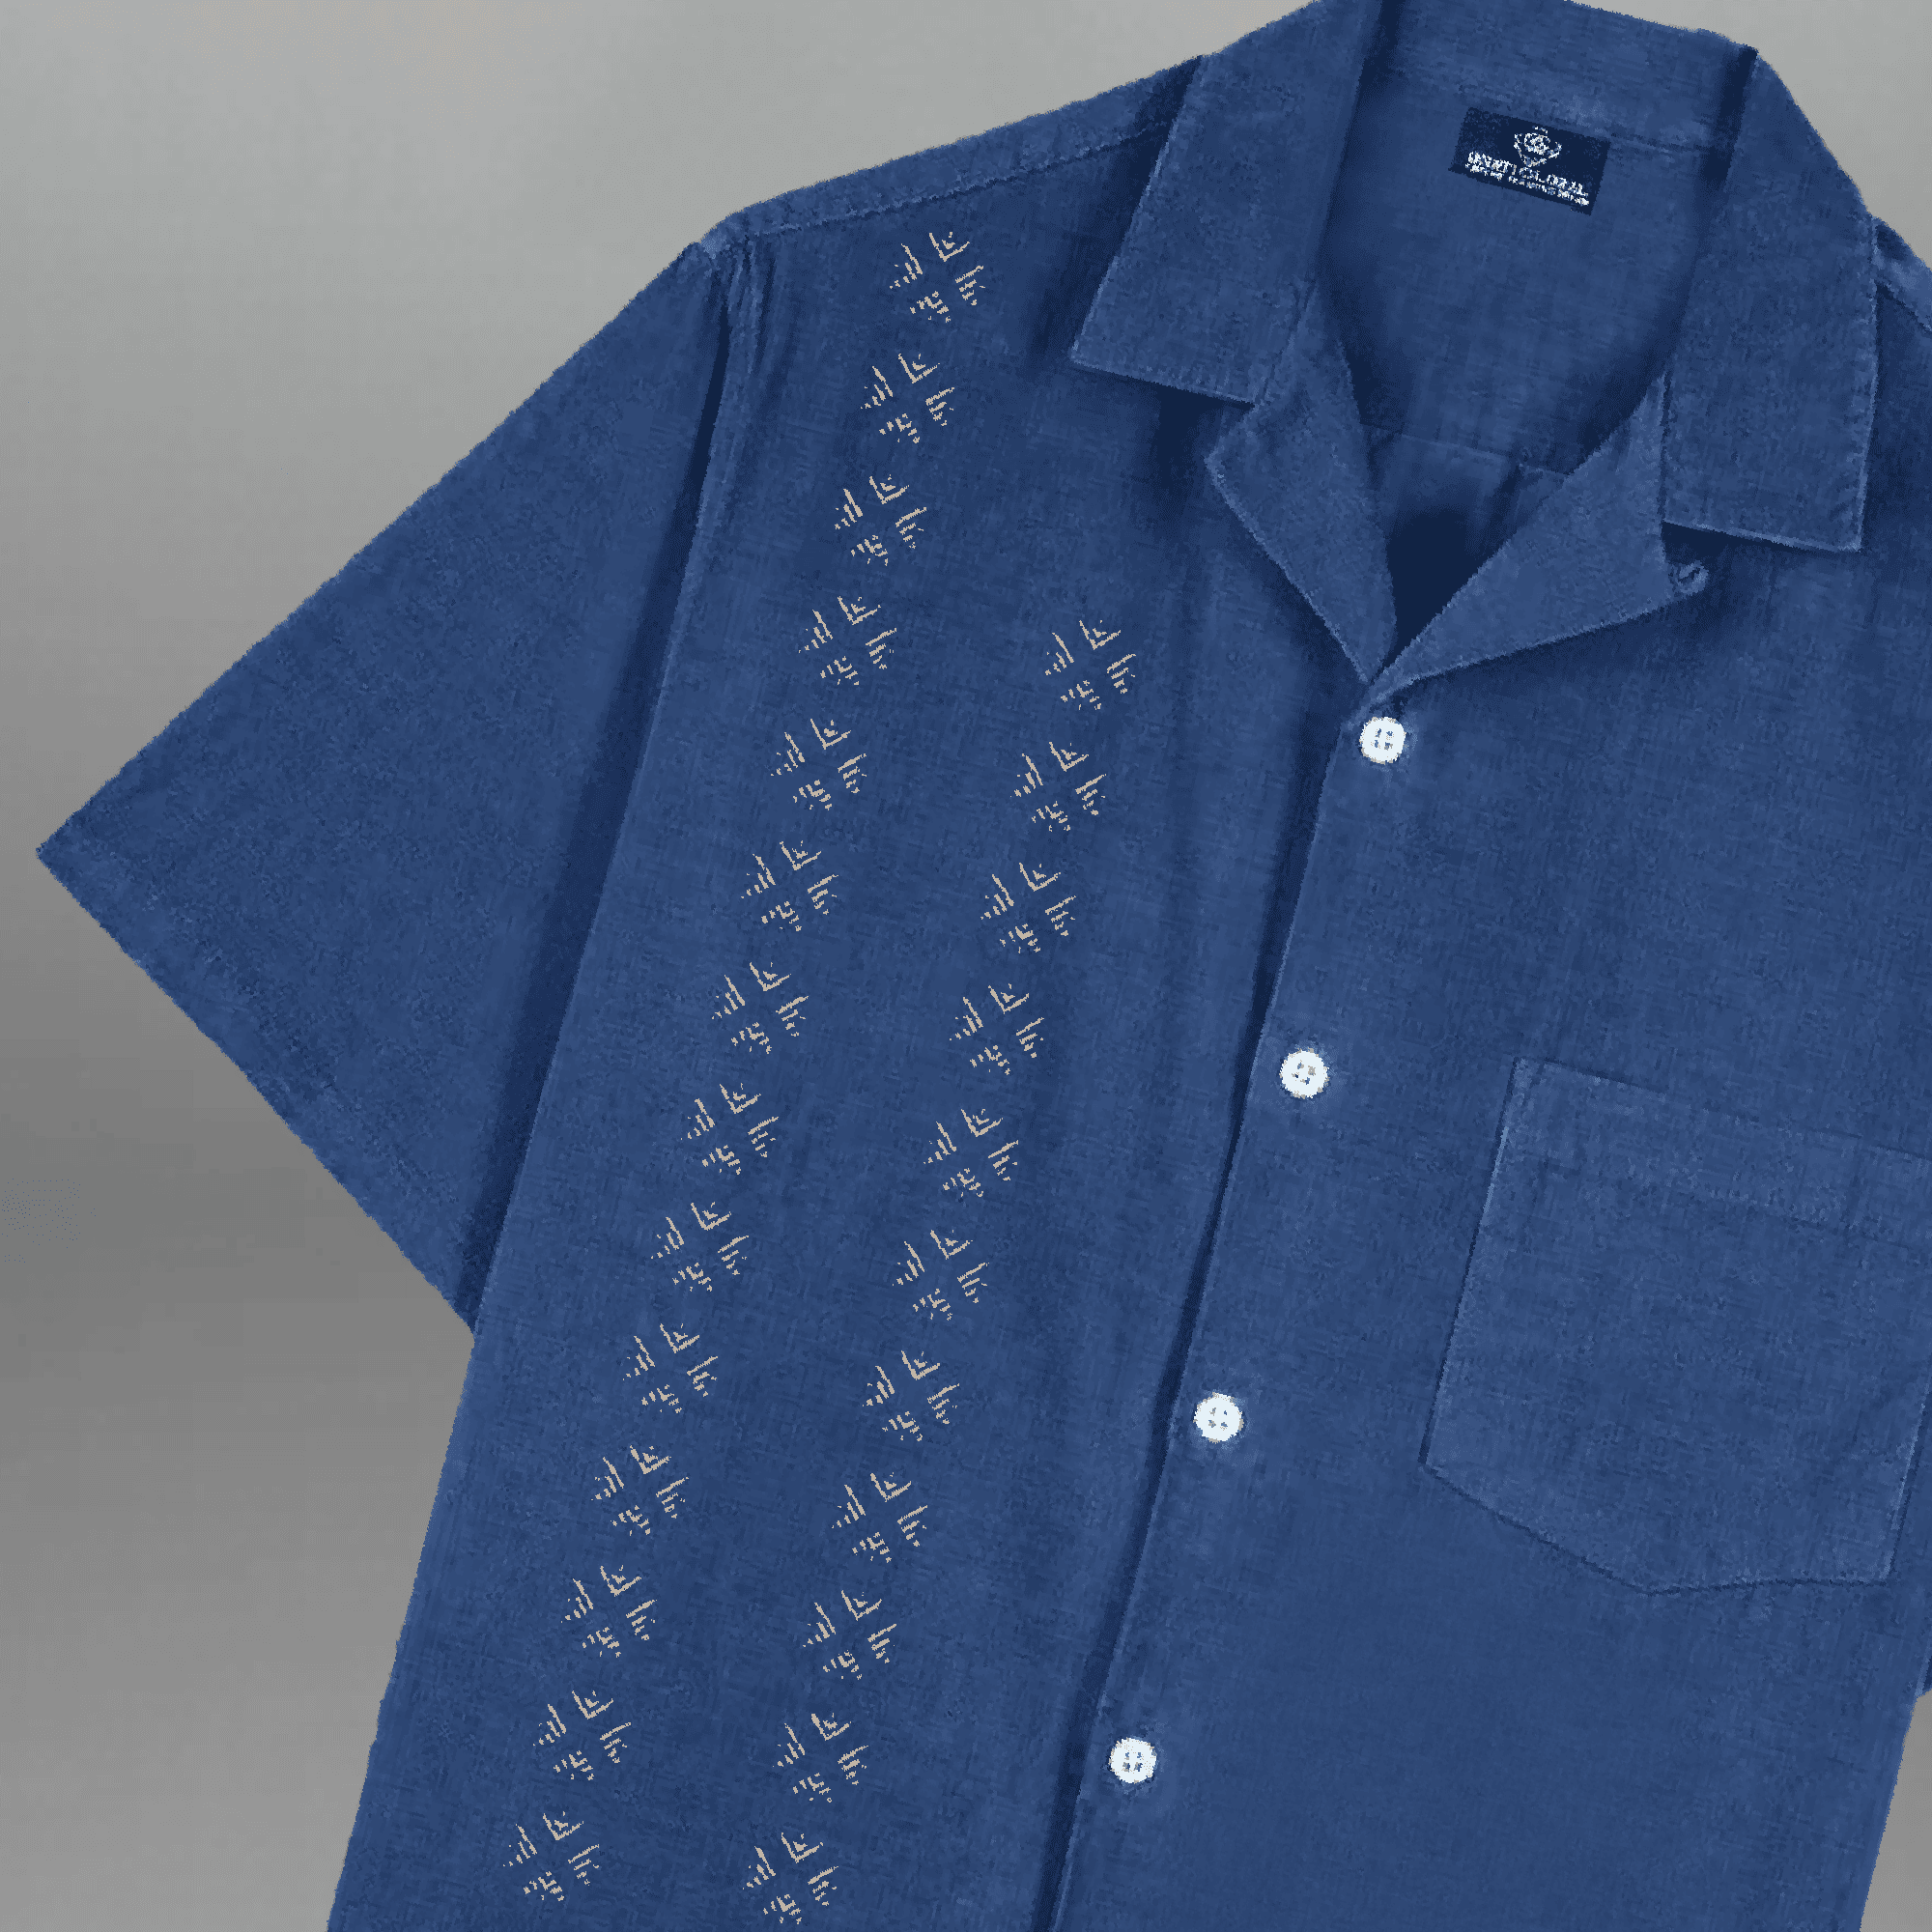 Men's Blue Embroidered Camp Collar Shirt with a Pocket-RMS046